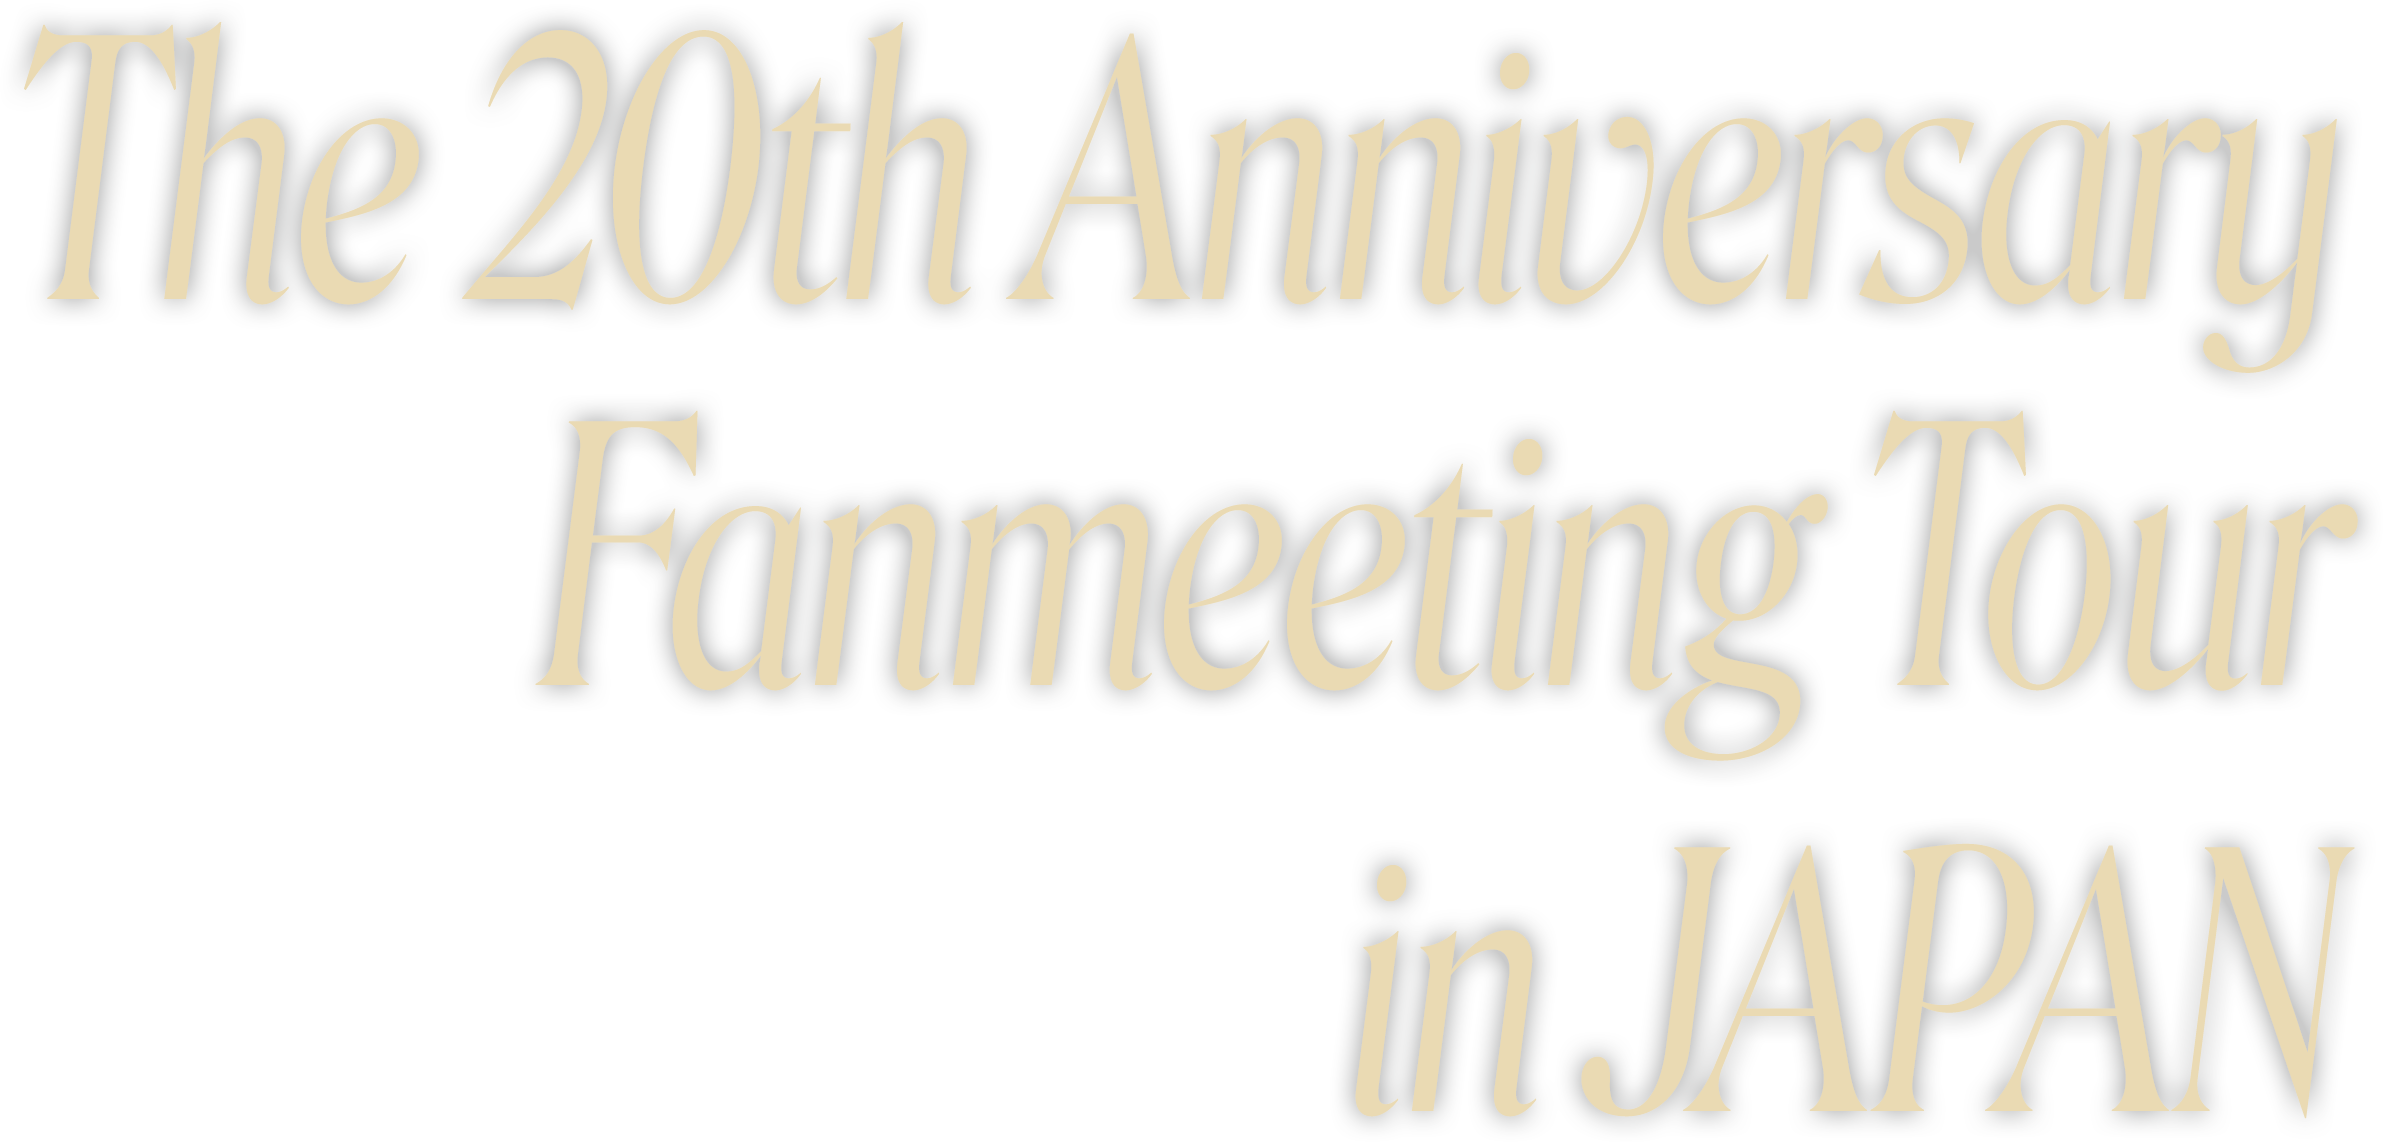 The 20th Anniversary Fanmetting Tour In Japan